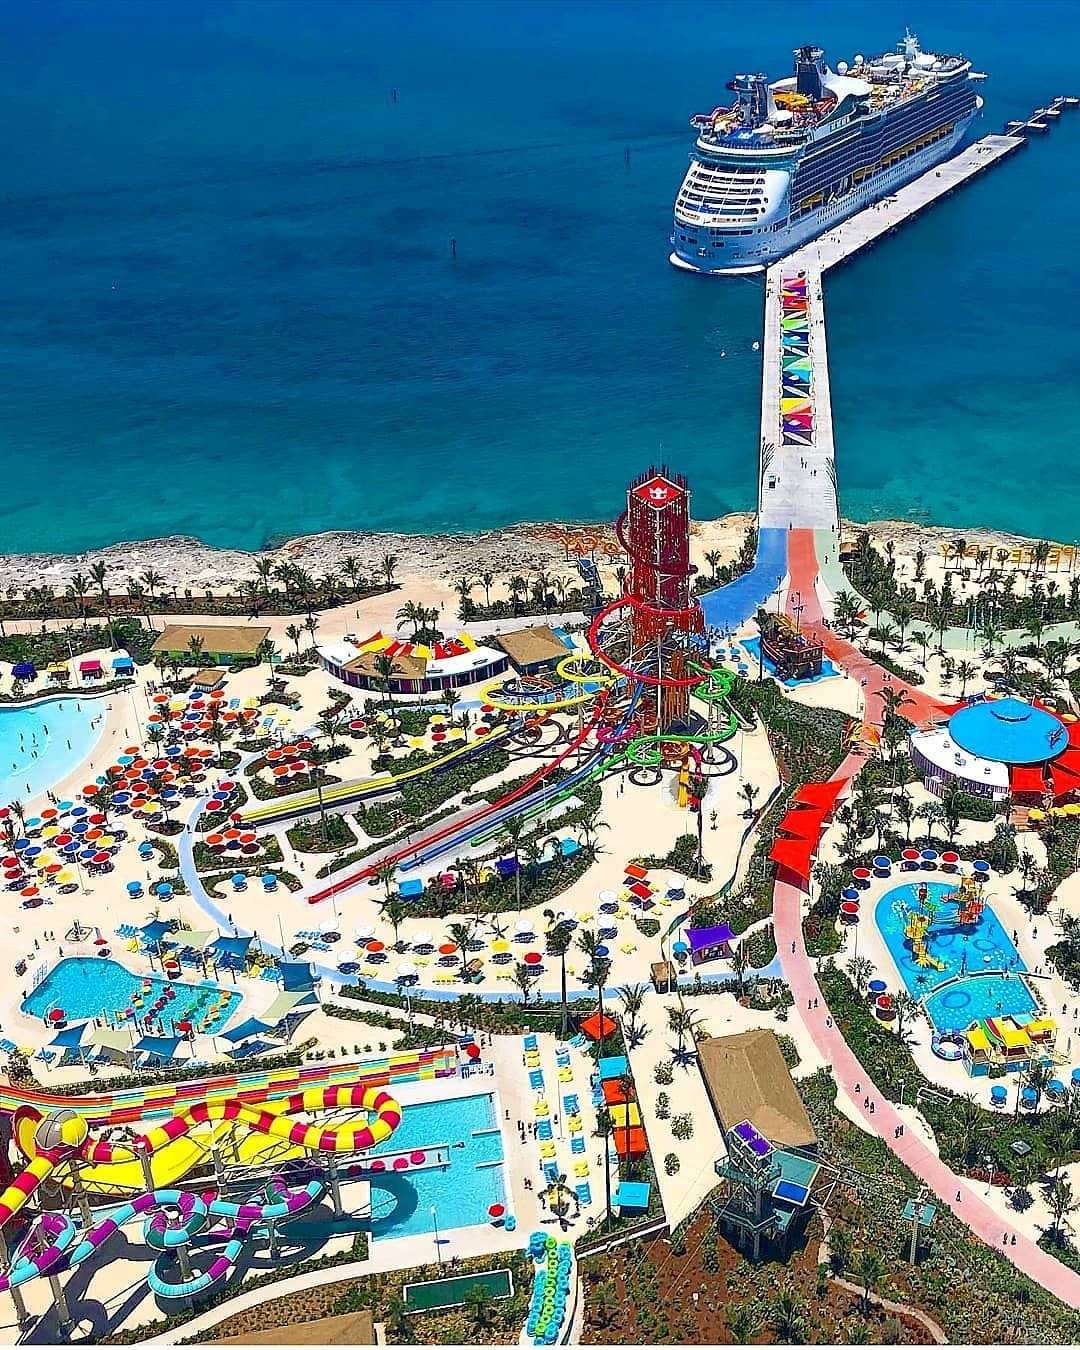 Welcome to the newly revamped CocoCay, Bahamas! Have you ...